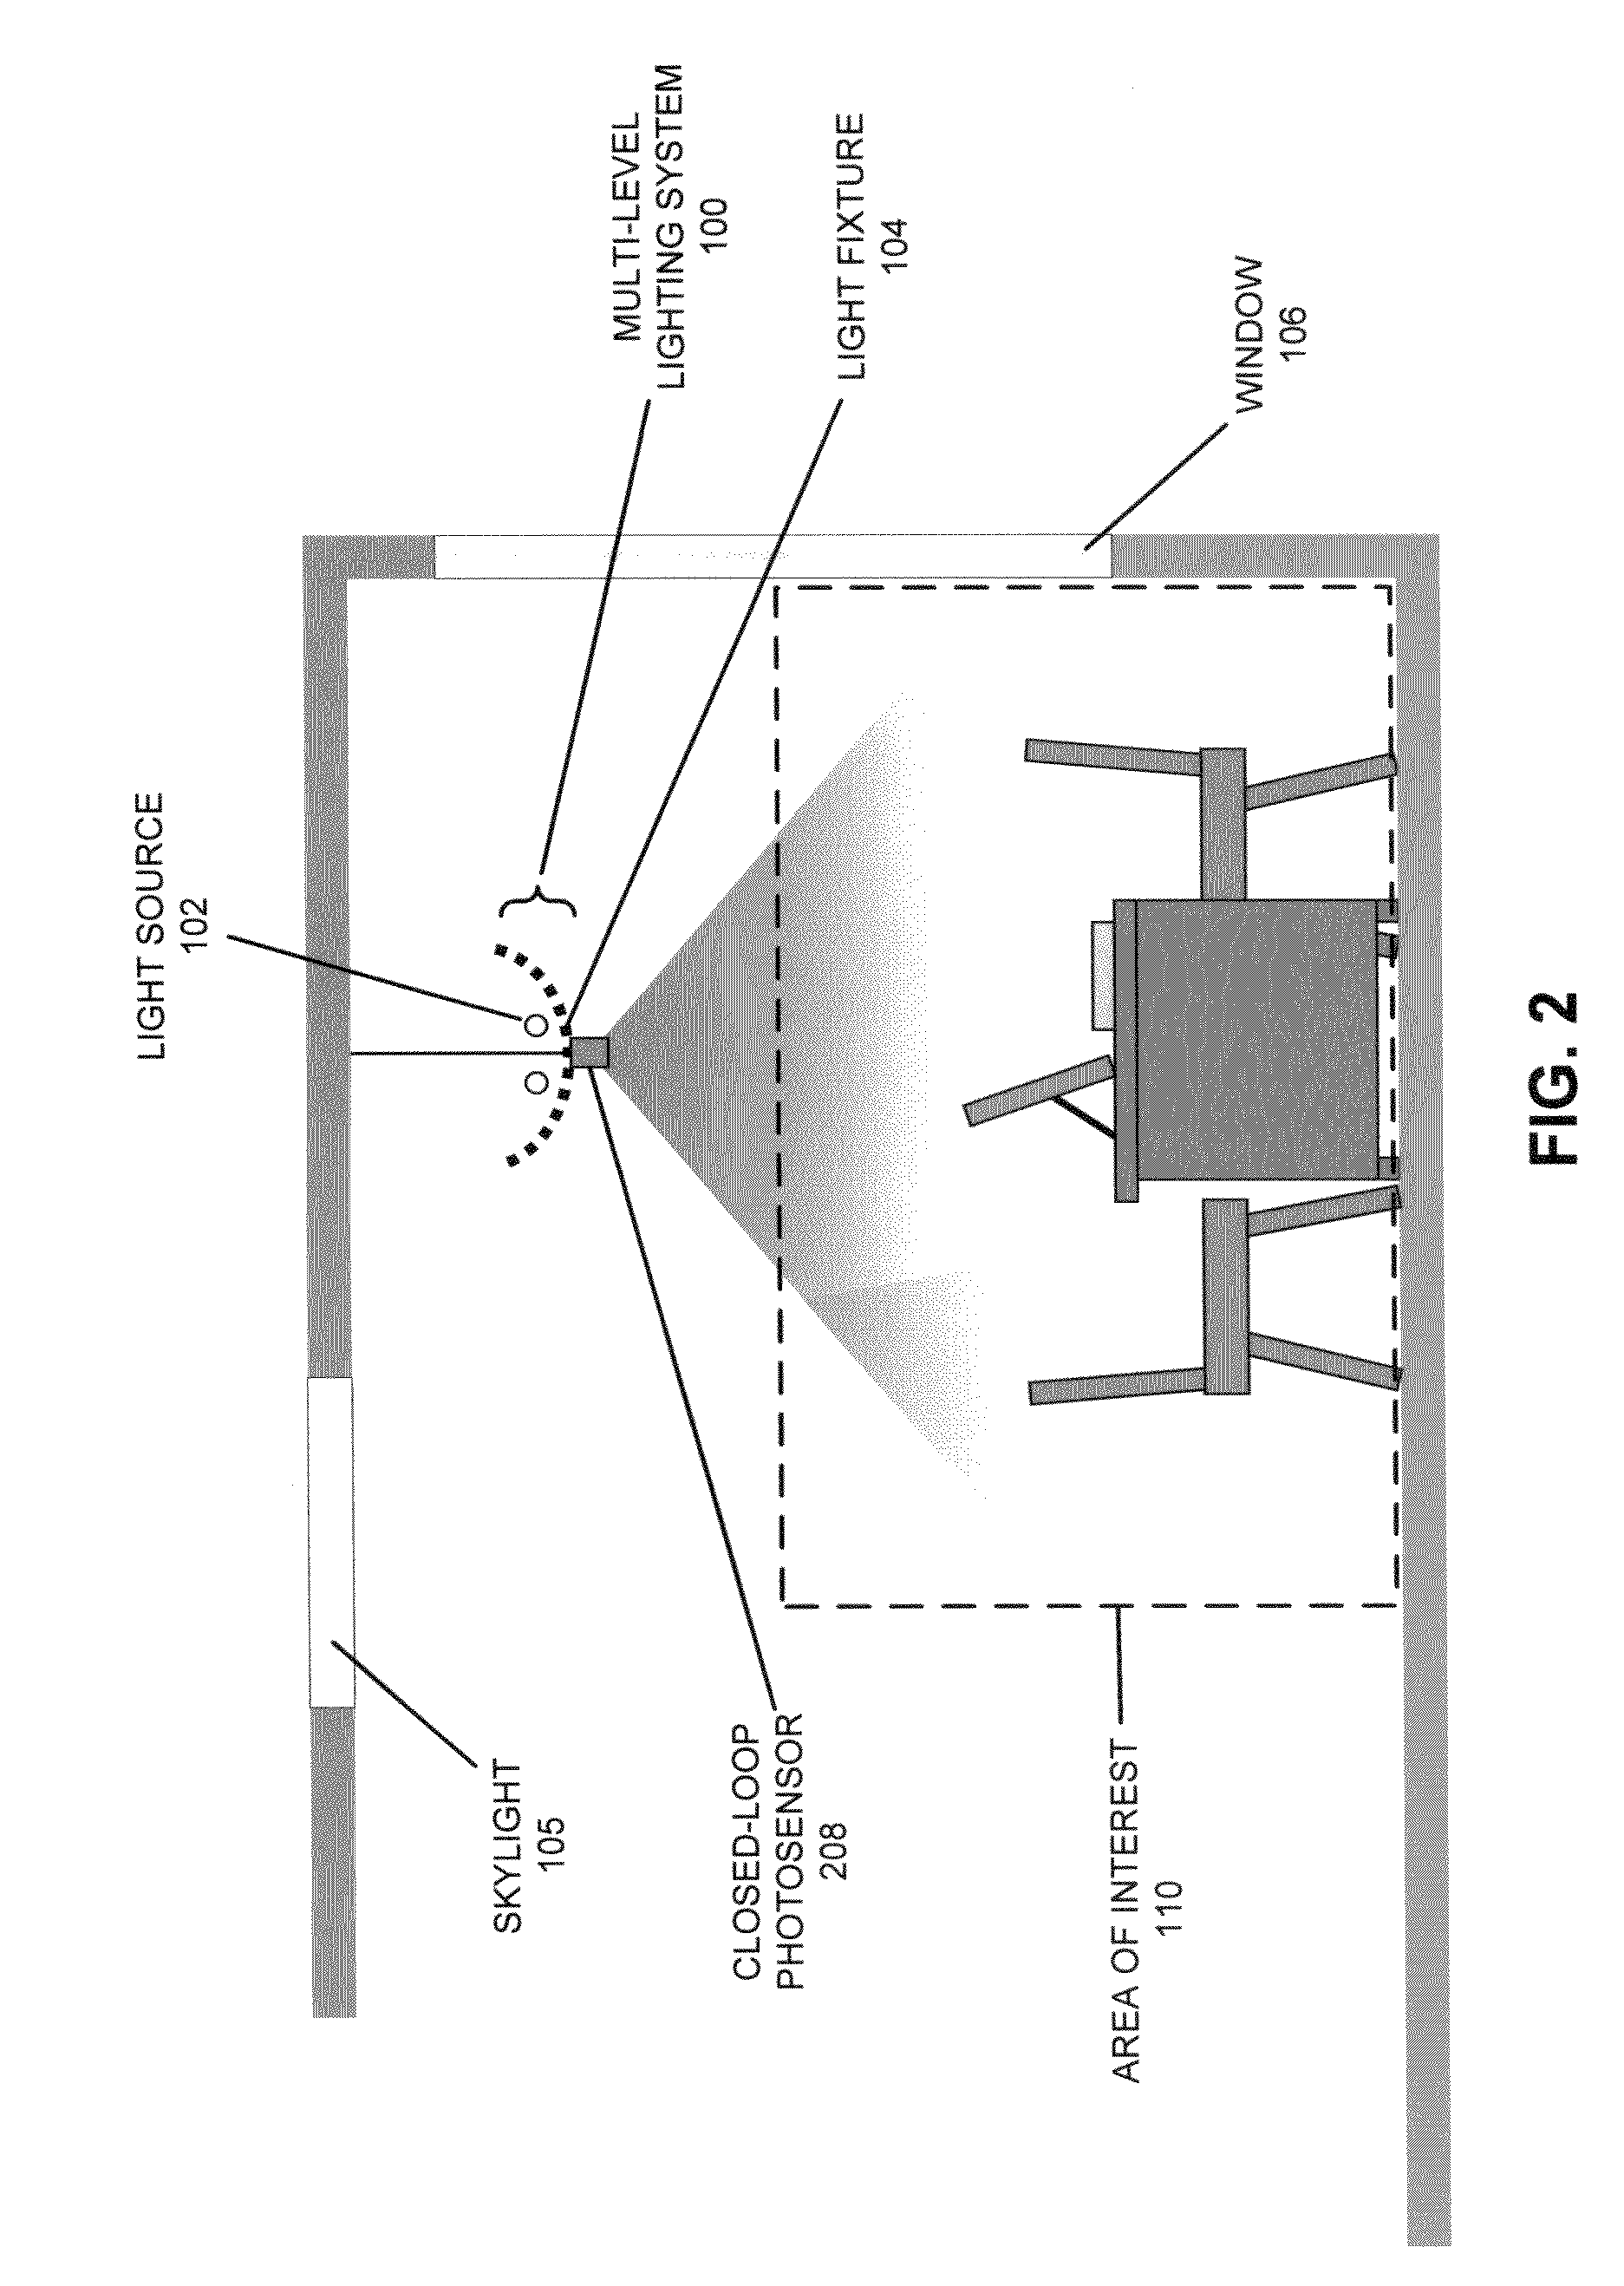 Method for preventing incorrect lighting adjustments in a daylight harvesting system